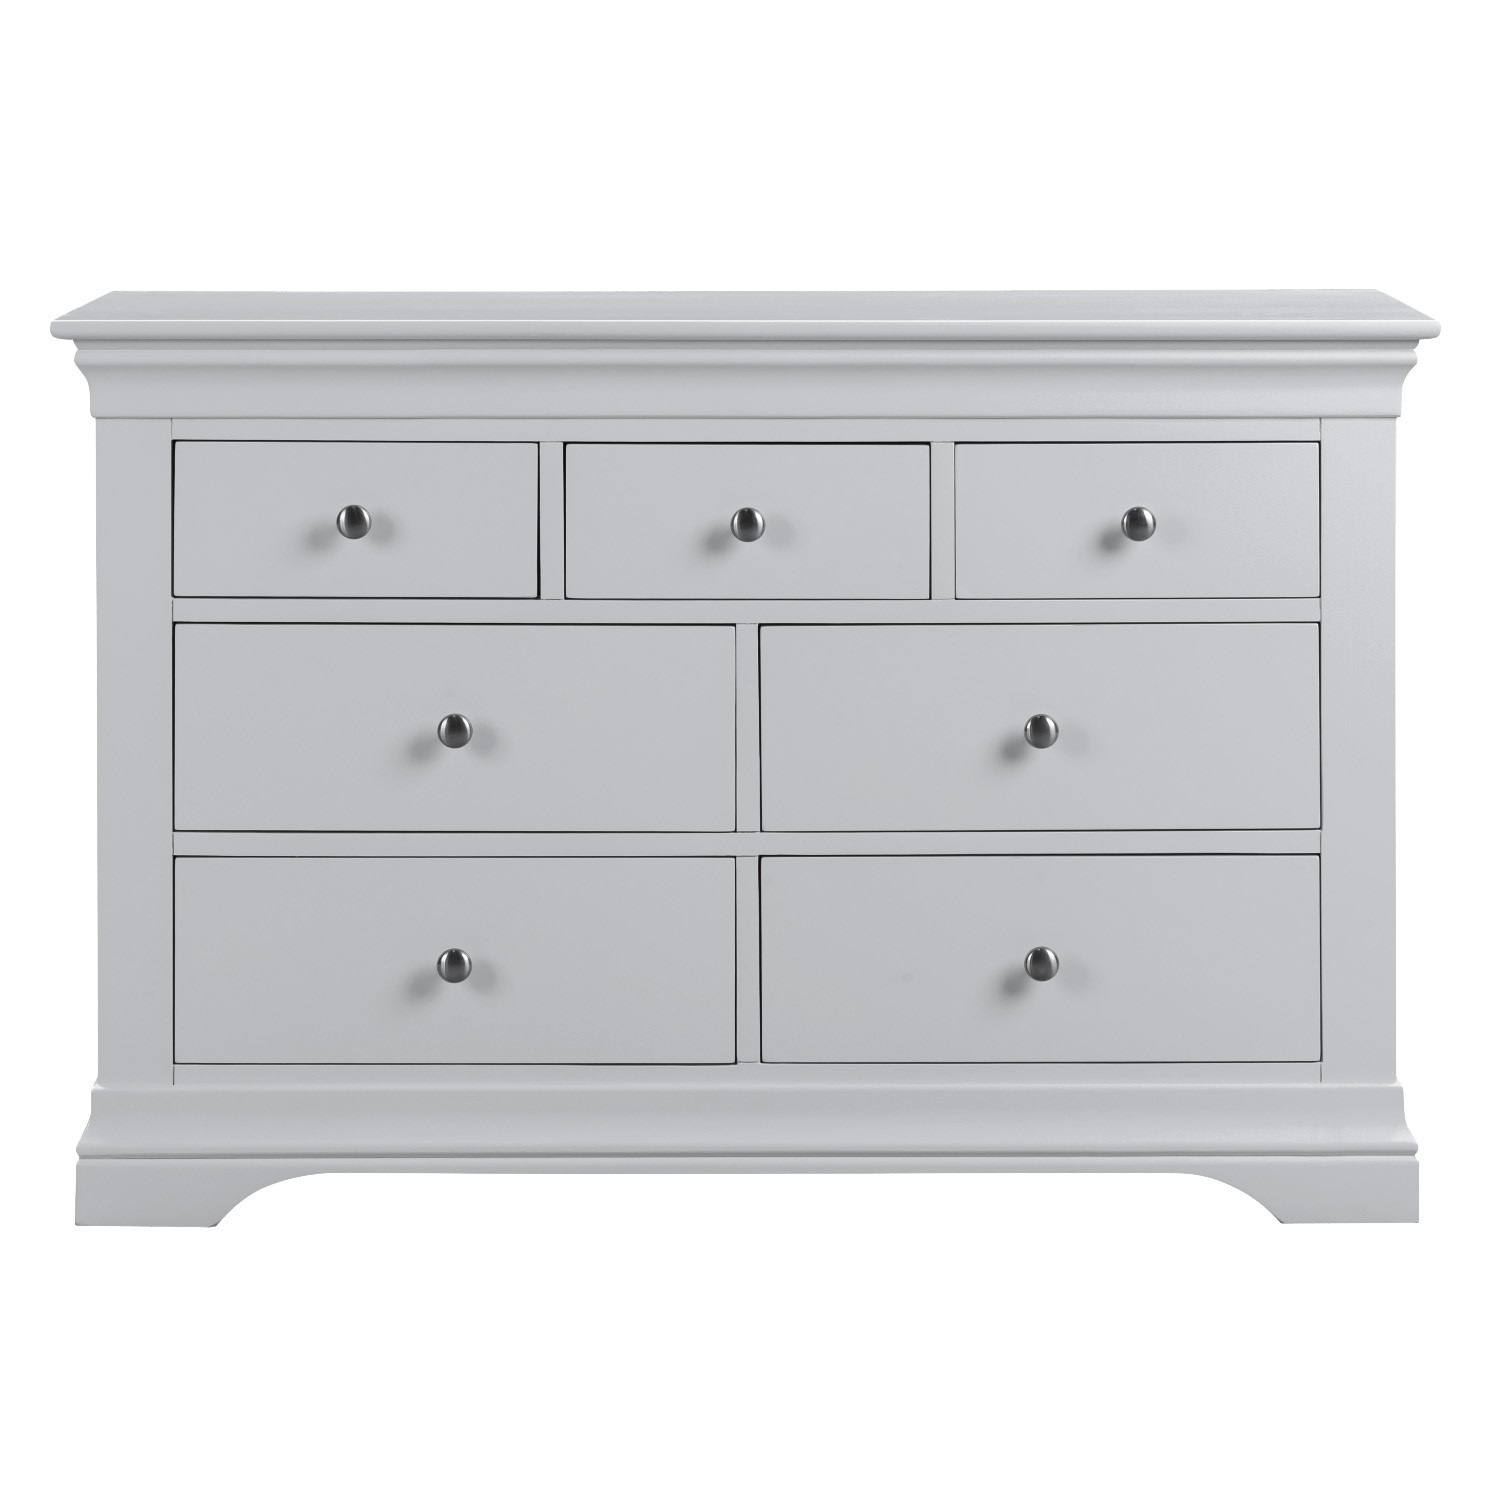 Read more about Pale grey 4 + 3 drawer wide chest of drawers olivia